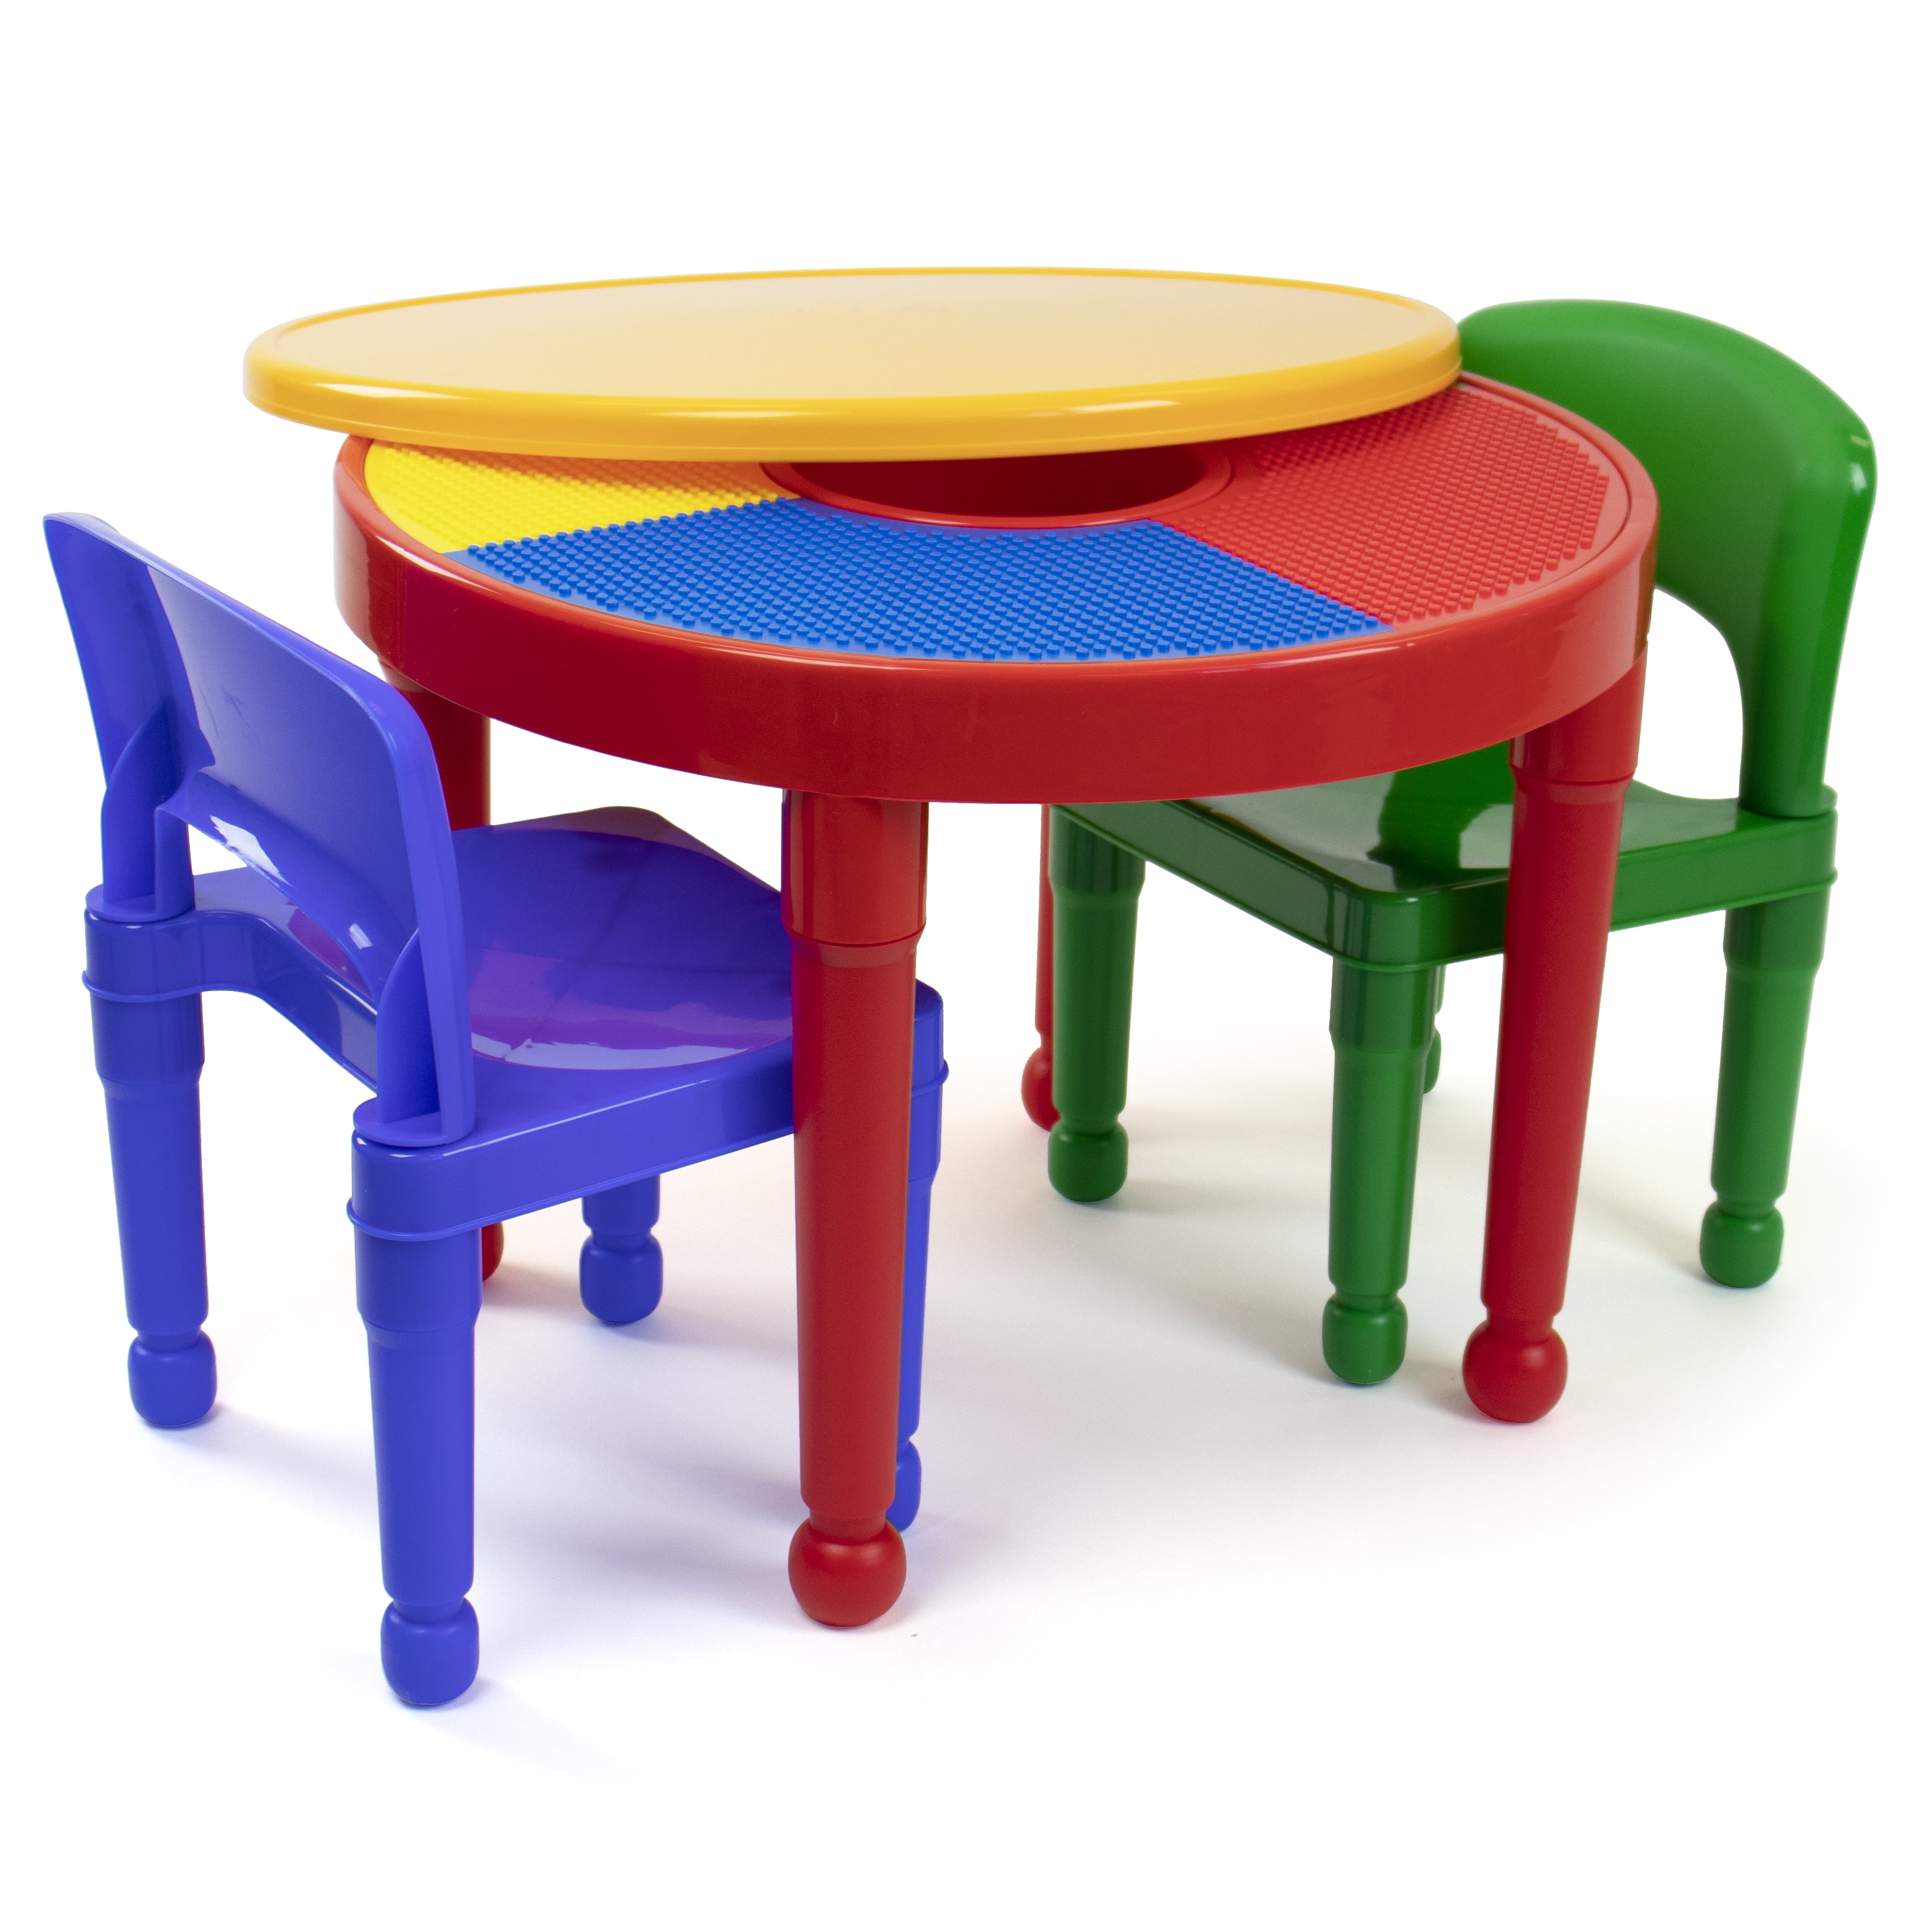 Activity Table And 2 Chairs Set, Children S Round Table And Chairs